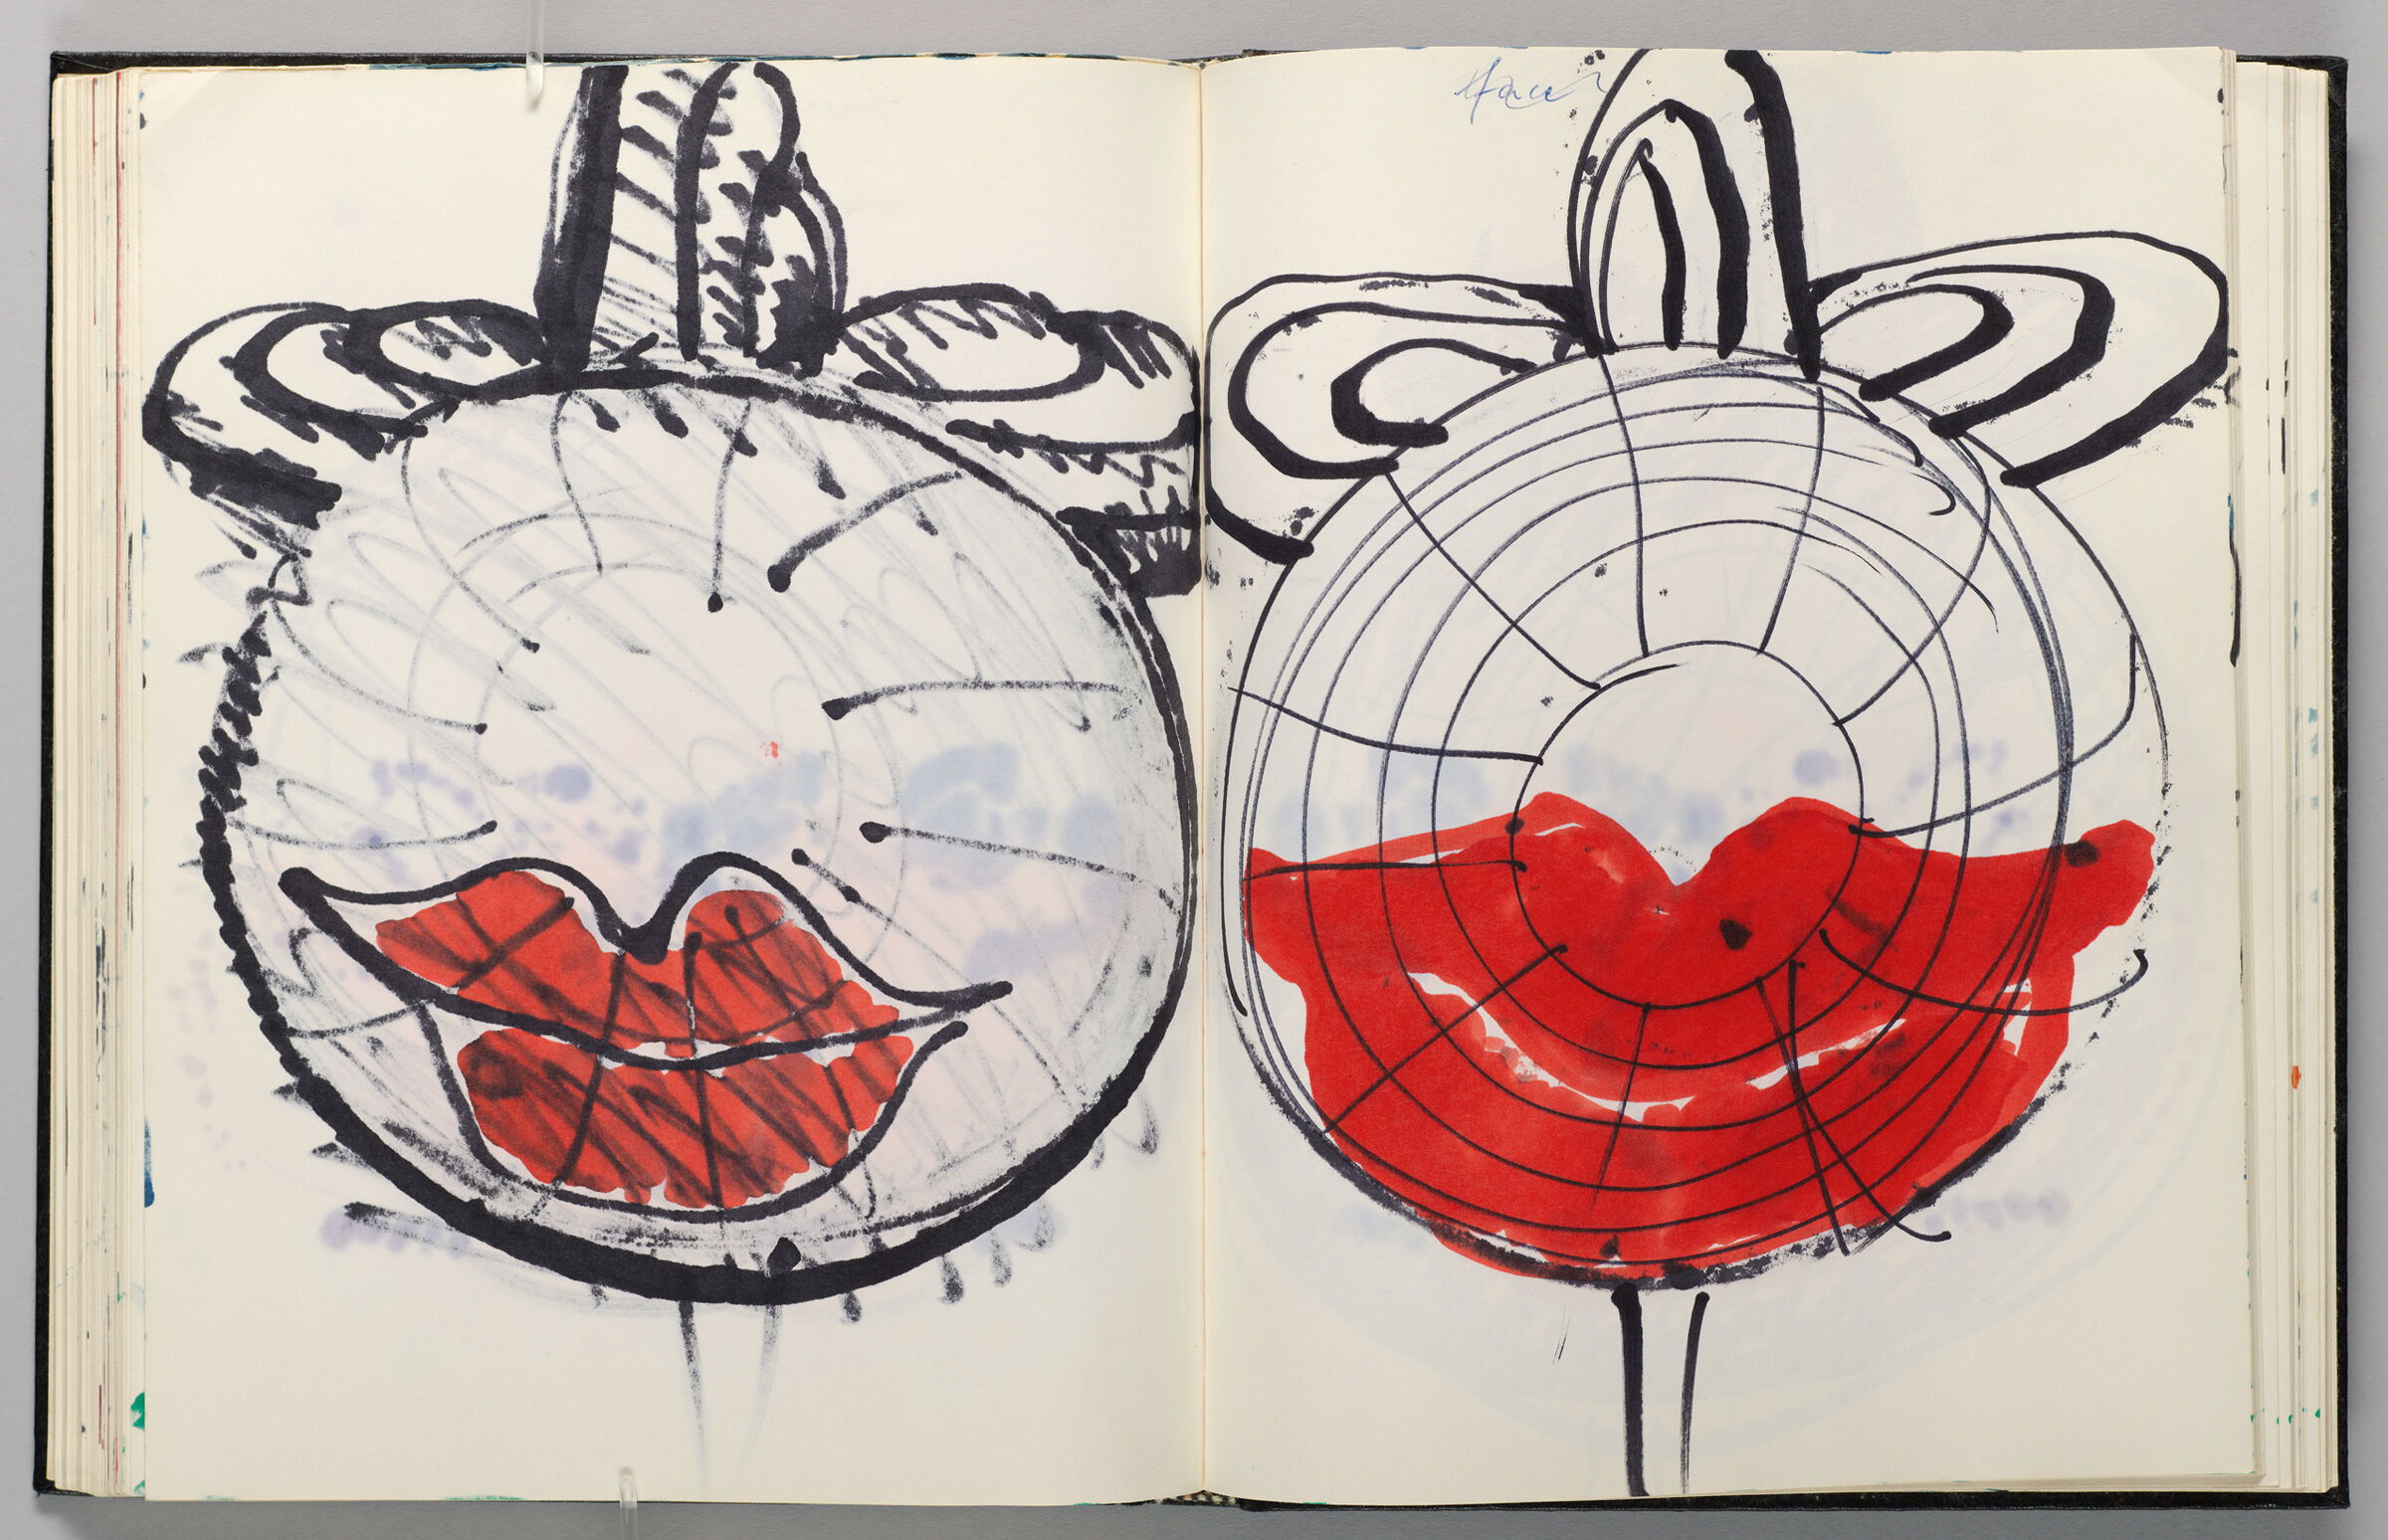 Untitled (Bleed-Through Of Previous Page, Left Page); Untitled (Barrage Balloon Design, Right Page)